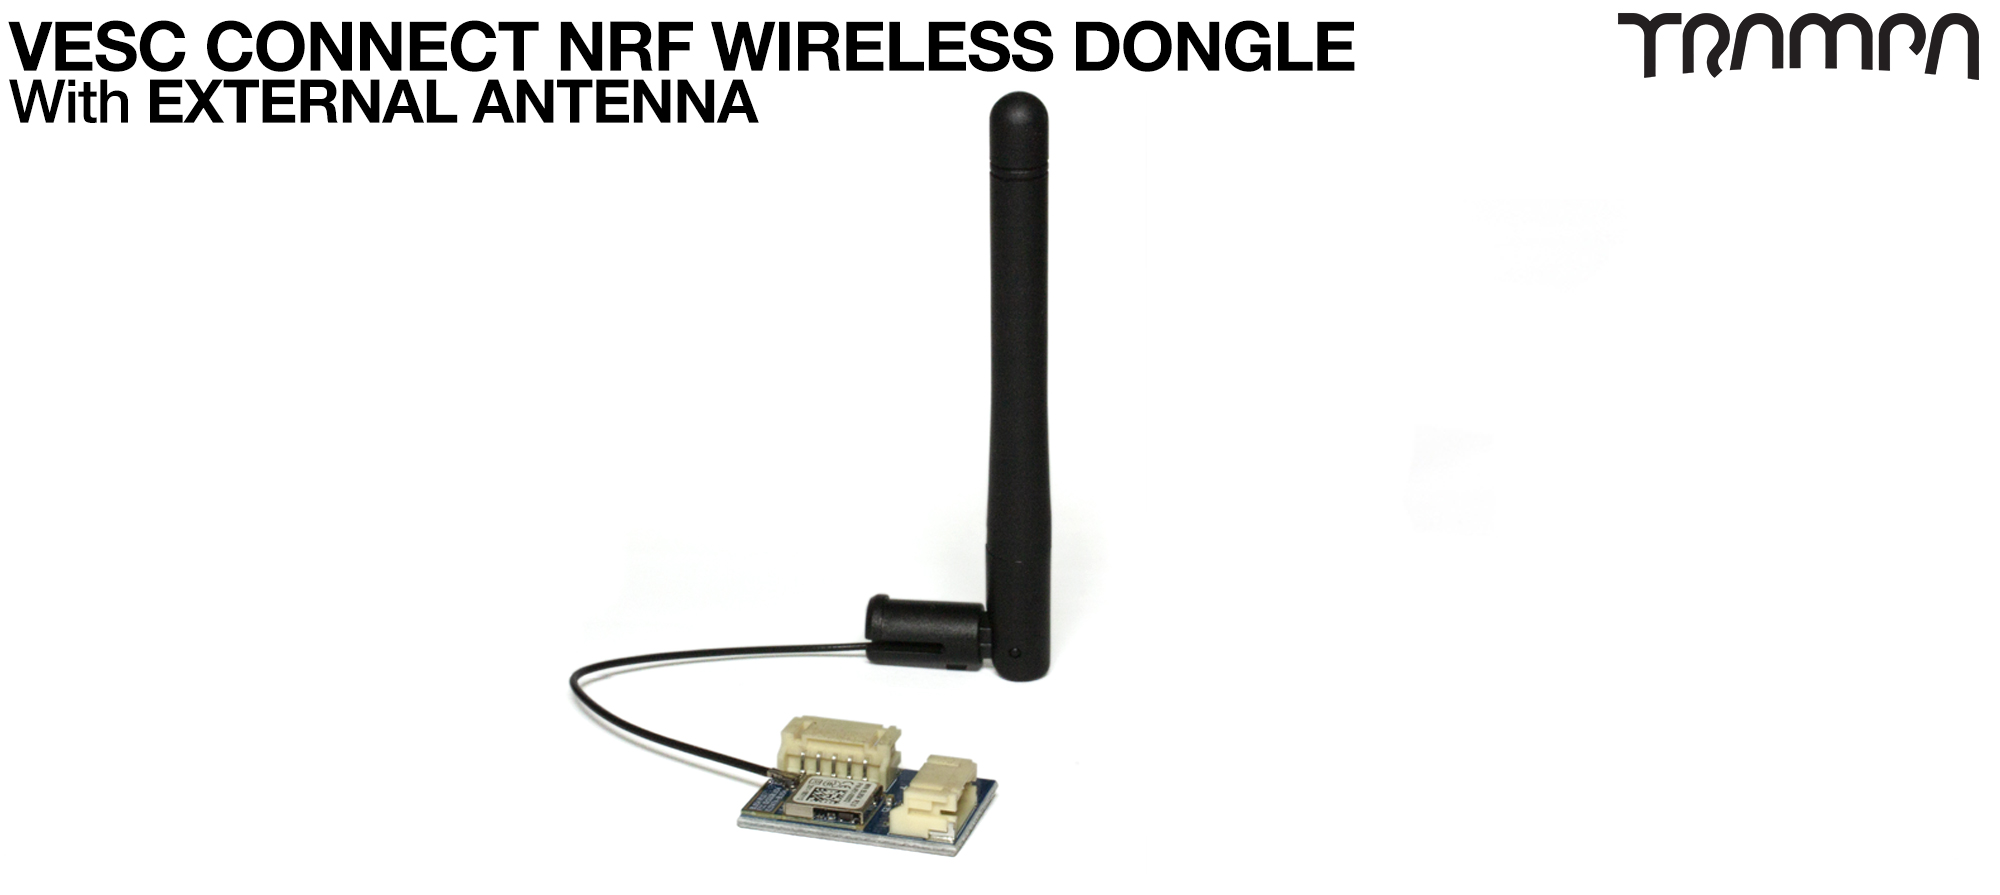 VESC Connect NRF Wireless Dongle  with EXTERNAL ARIAL ANTENNA 